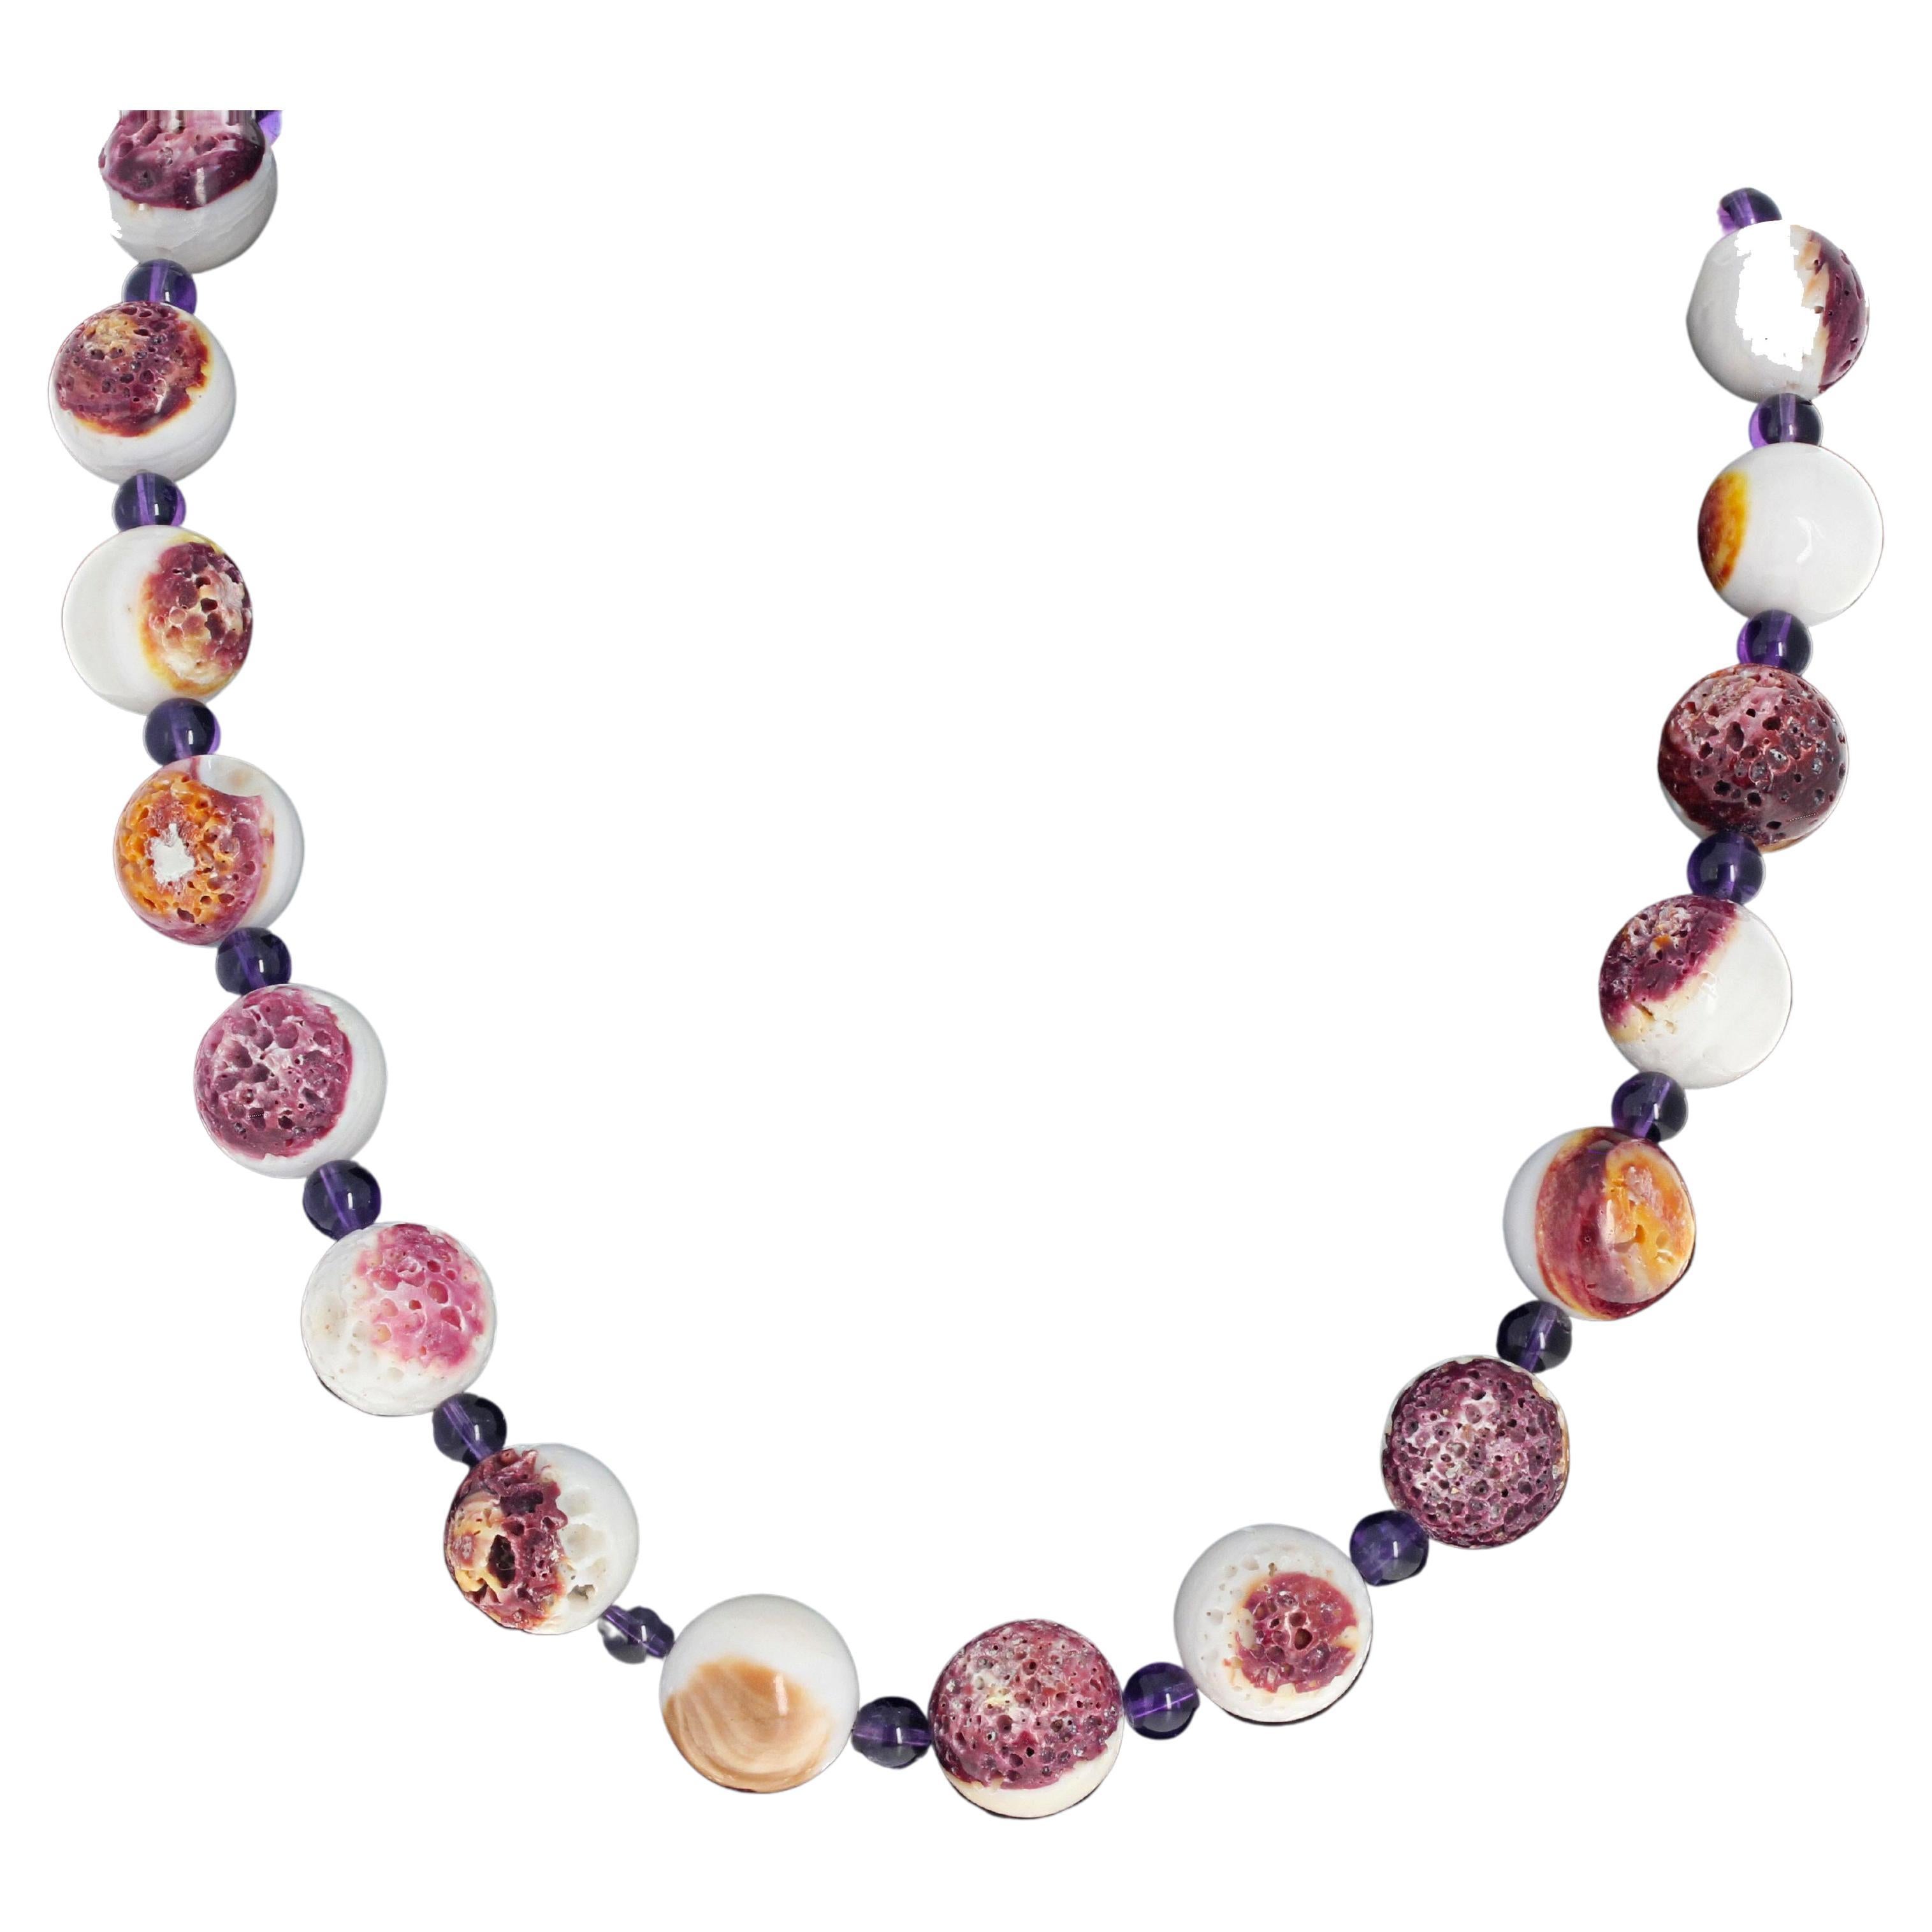 This amazing real Spiny Oyster ( 16 mm) is enhanced with glowing highly polished round real Amethysts gems ( 6.5mm).  The necklace is 20 inches long and has an easy-to-use silver plated hook clasp.  This is really beautiful and amazingly